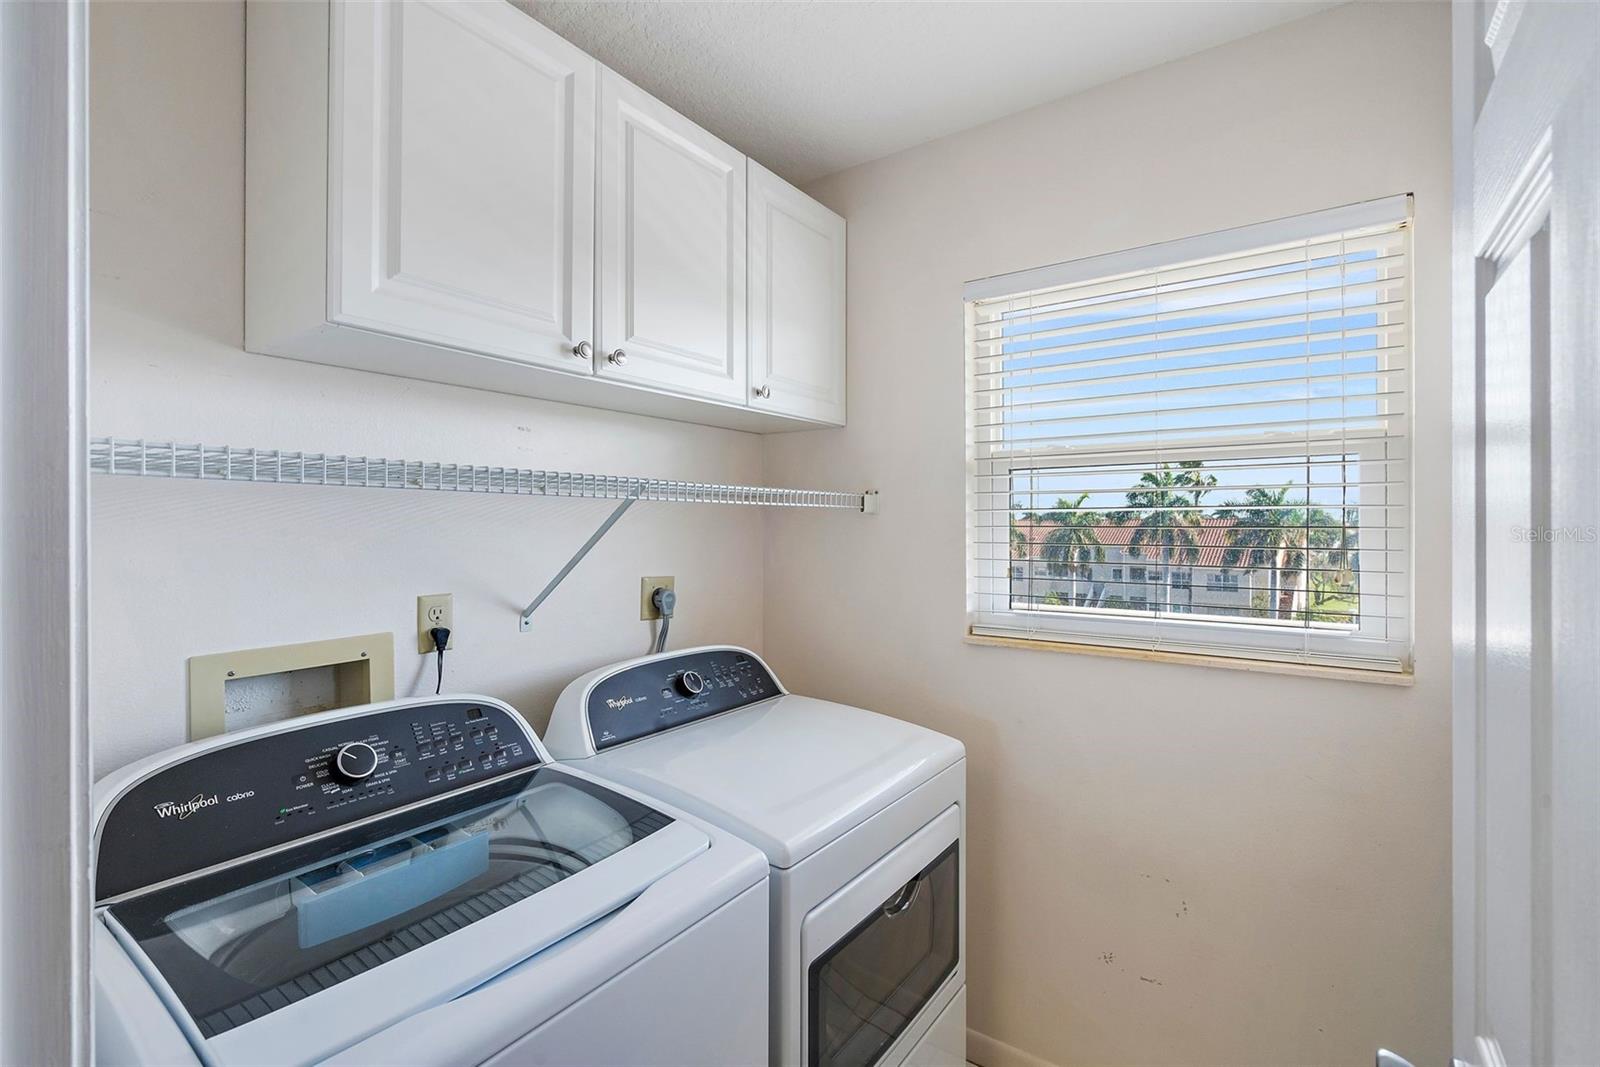 Door to the full-size laundry room with full-size washer and dryer.